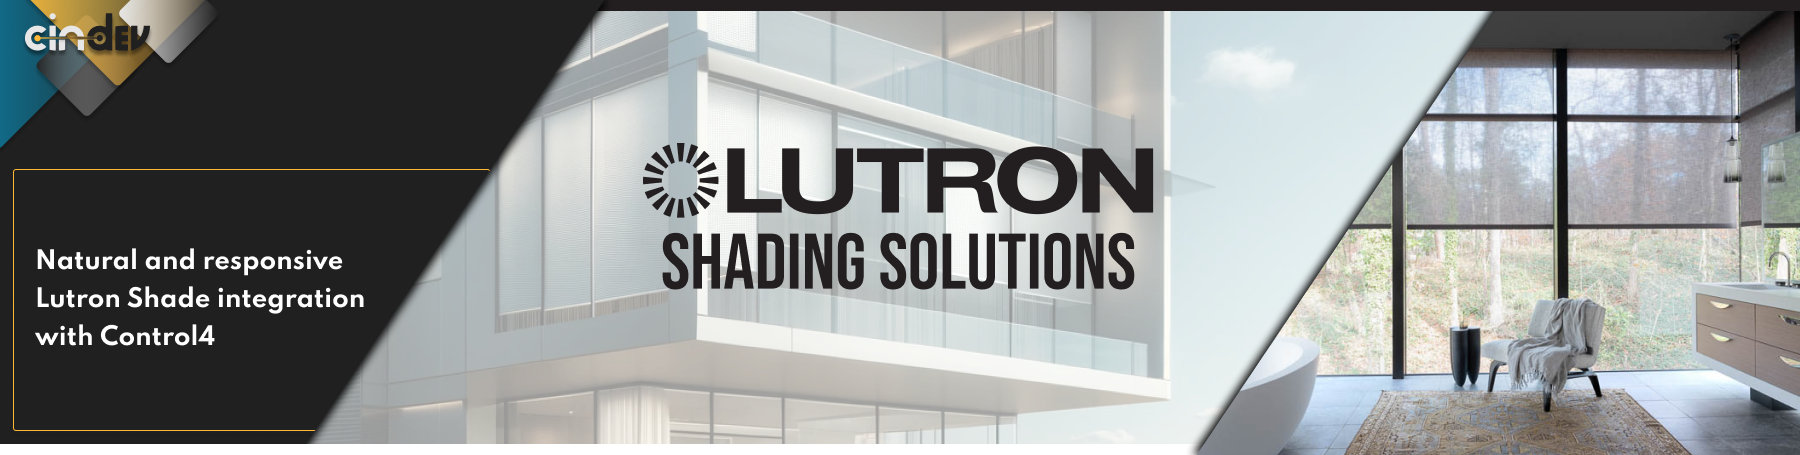 Lutron%20Shades.png?1595972505799